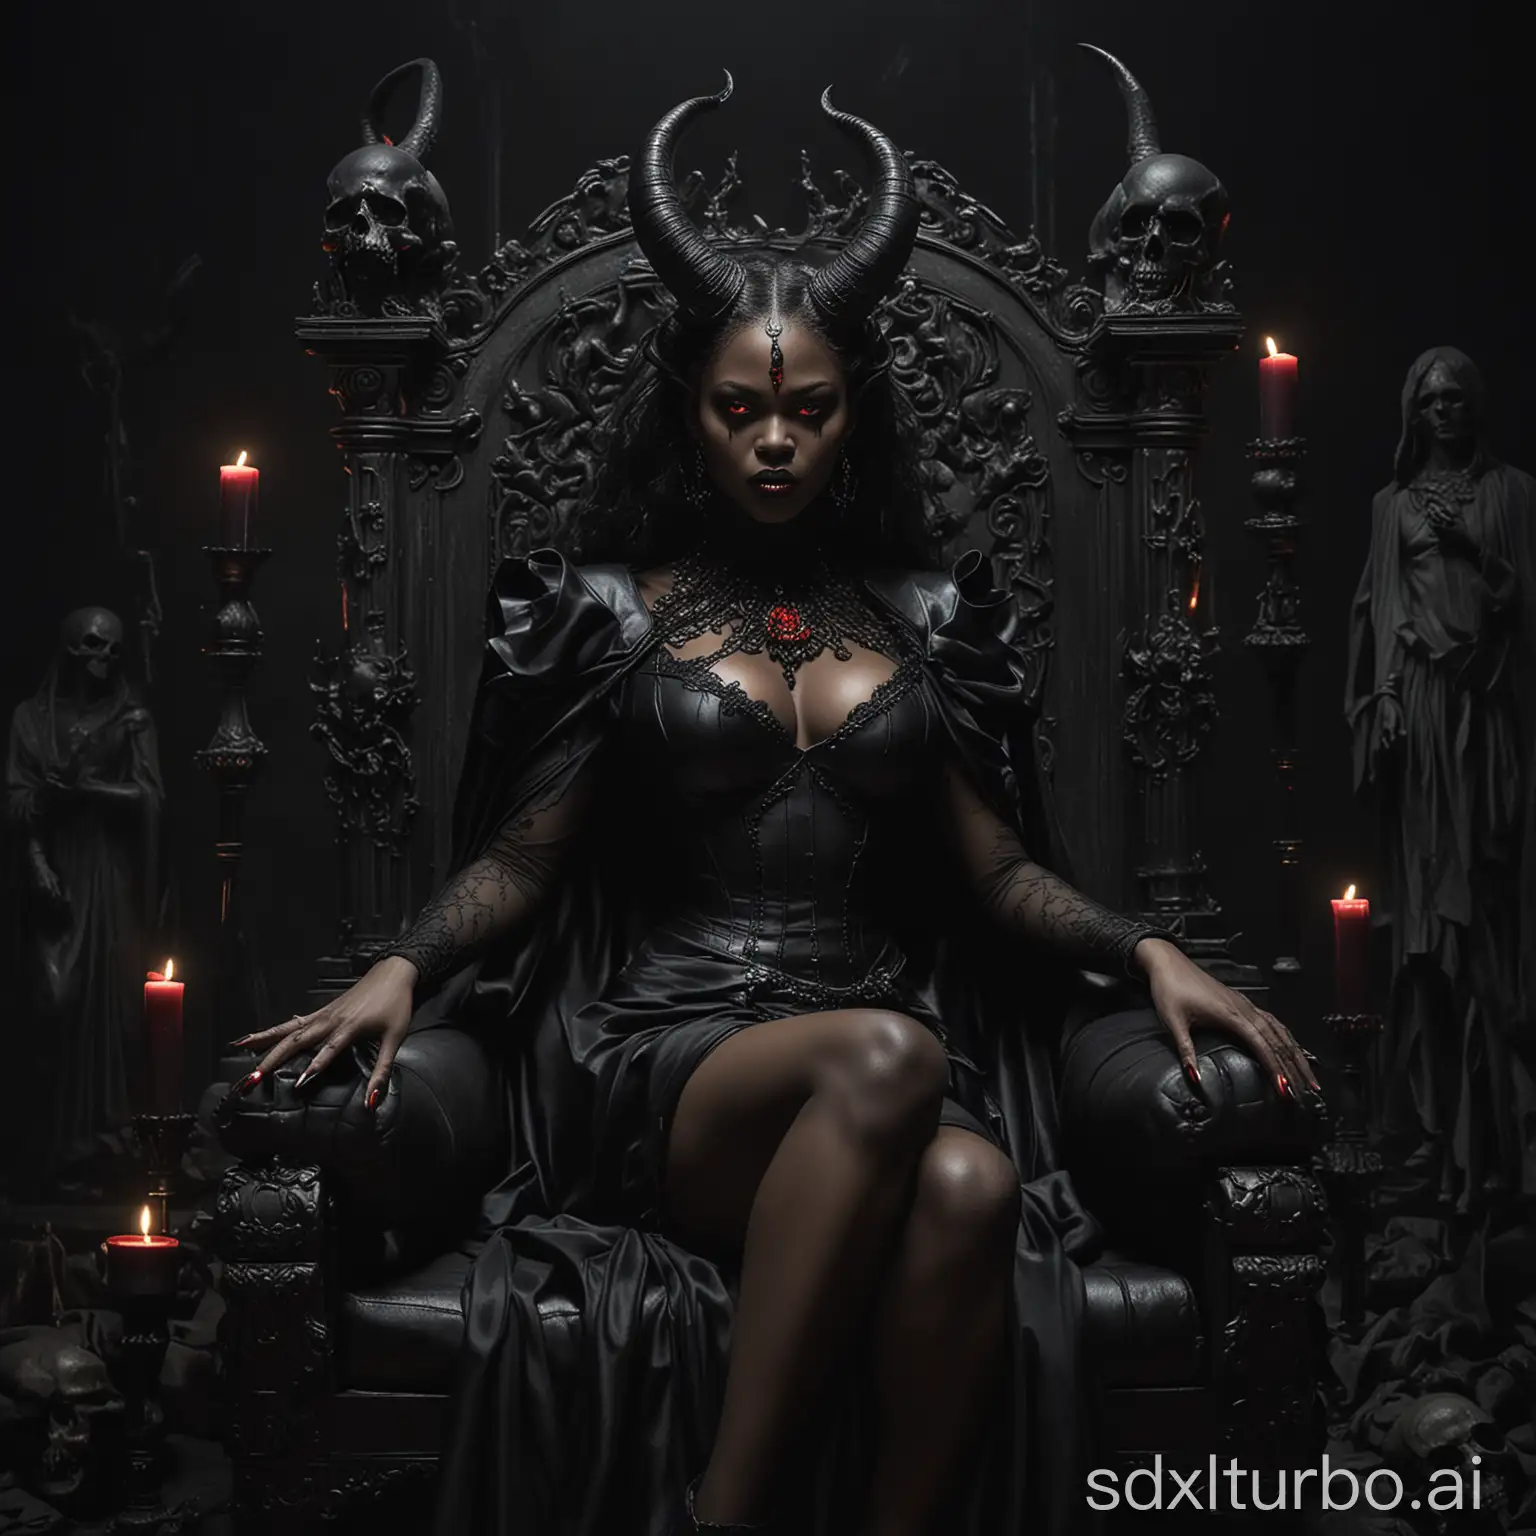 Majestic-Black-Demon-Queen-on-Throne-with-Skulls-and-Candles